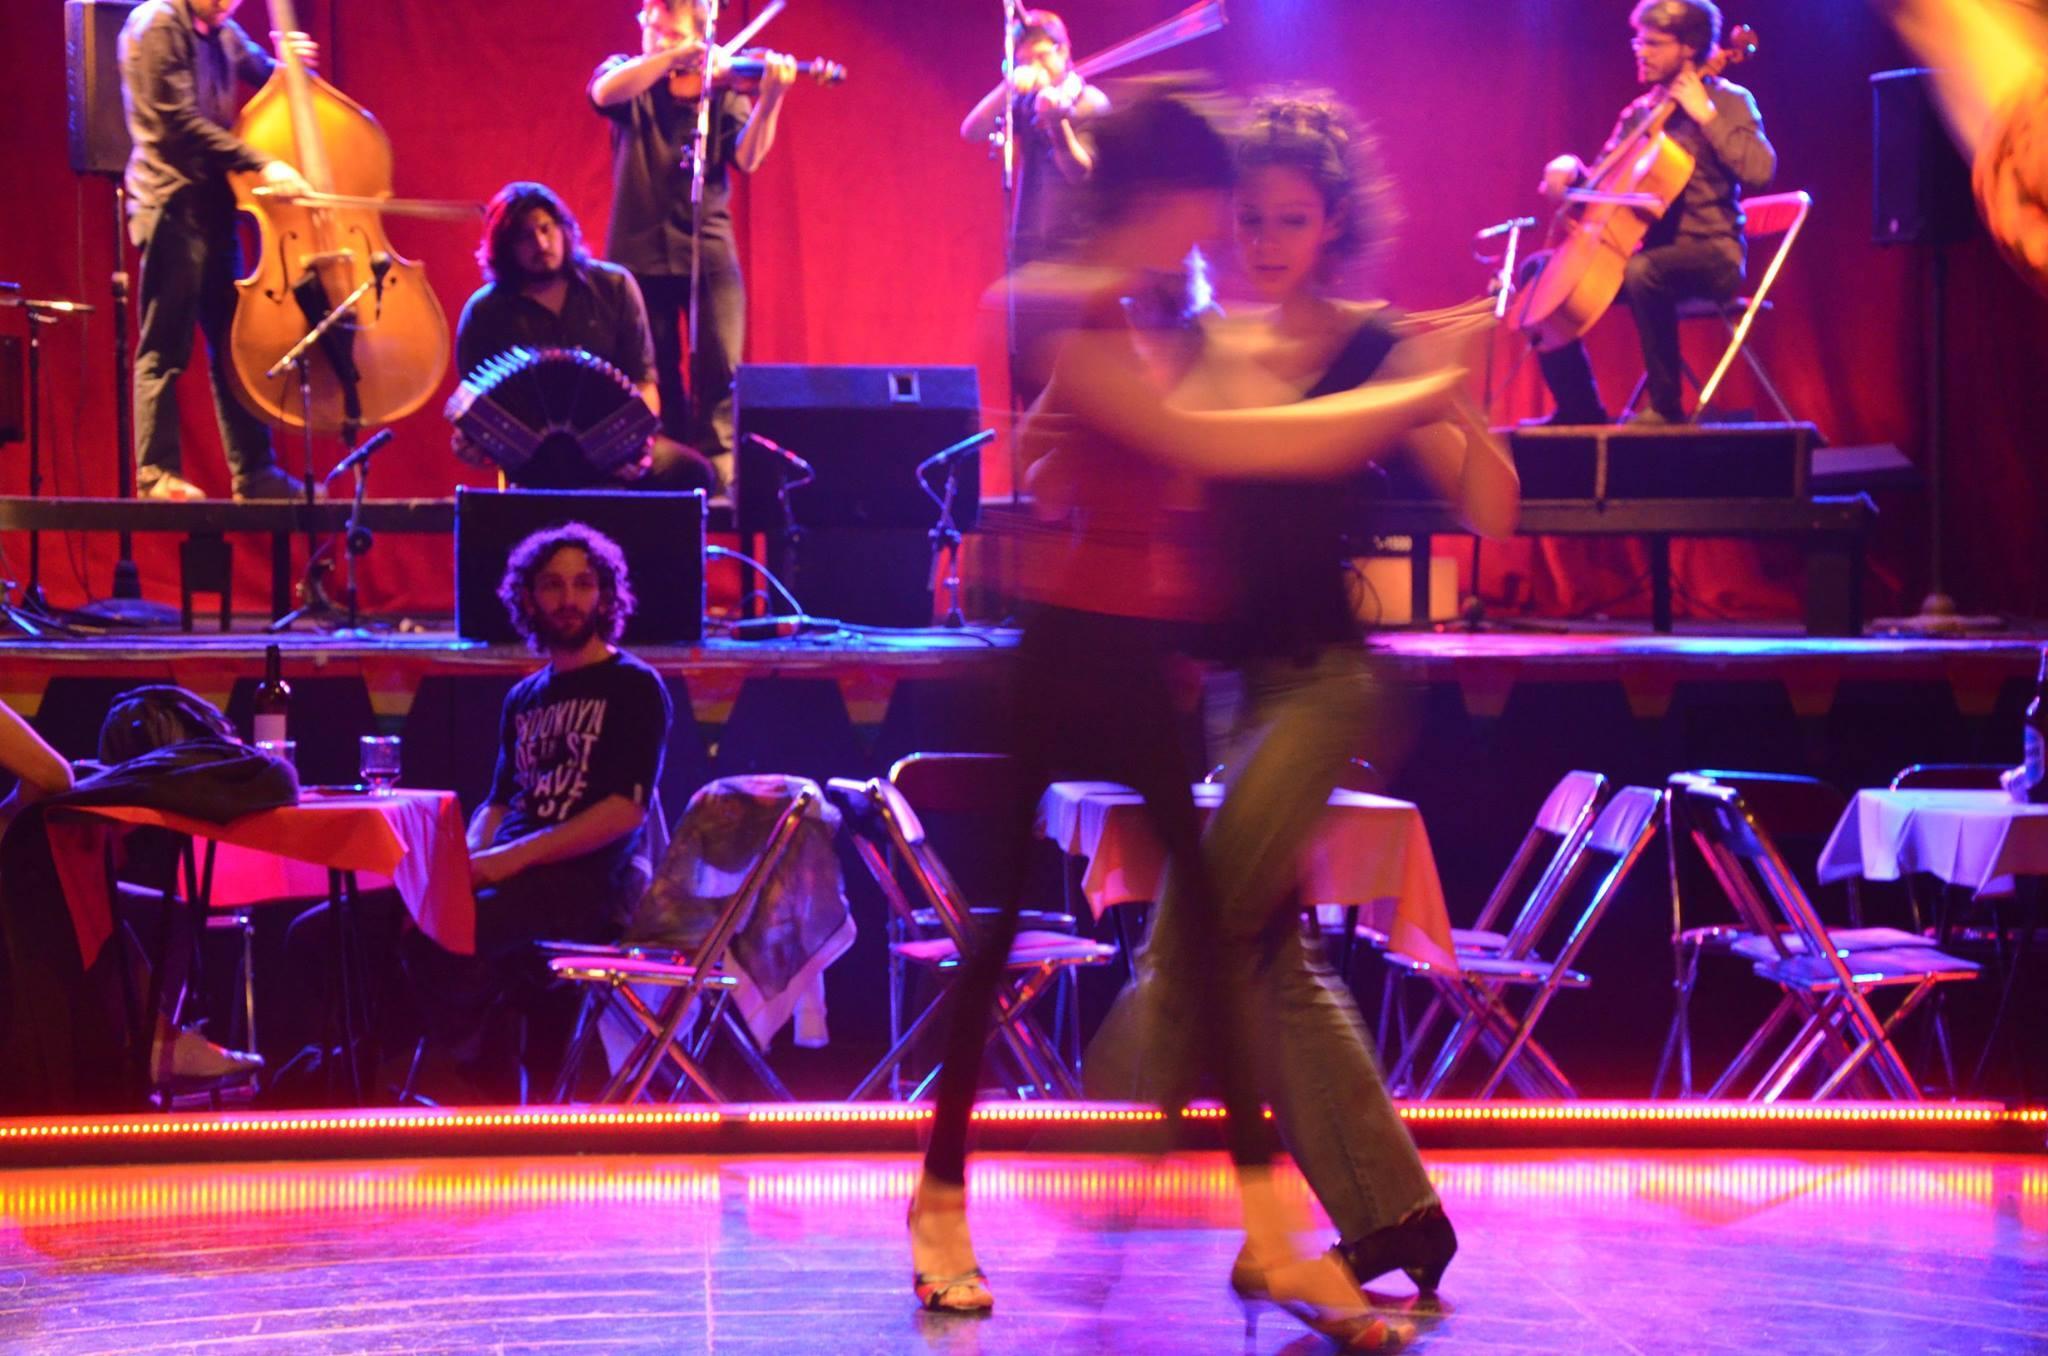 Tango Queer is all about dampening down Argentina's machismo